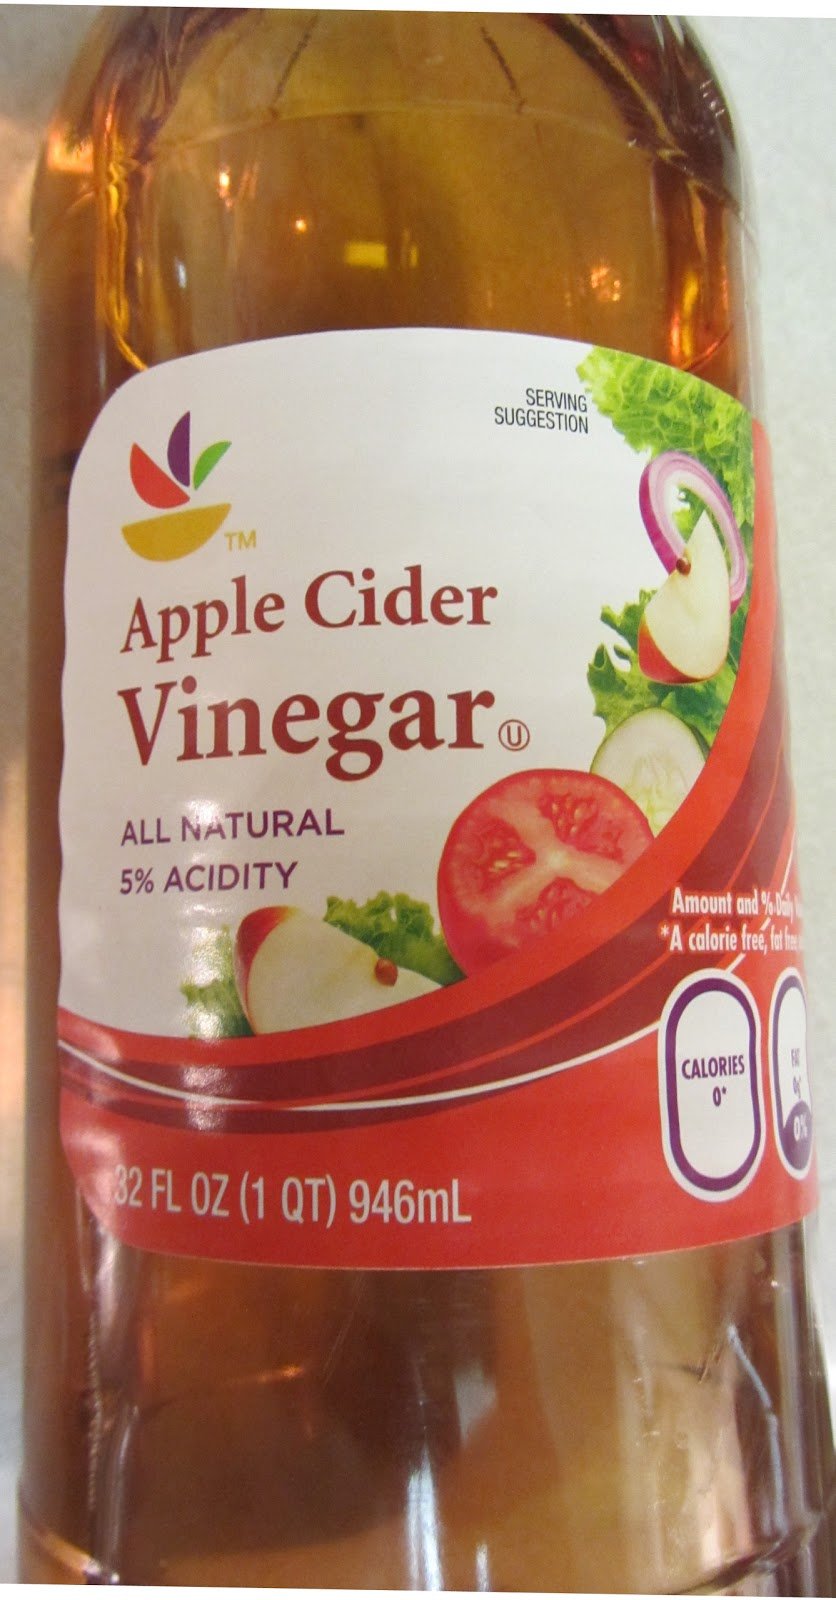 Me vs. Diabetes: Apple cider vinegar and water to lower blood sugar levels